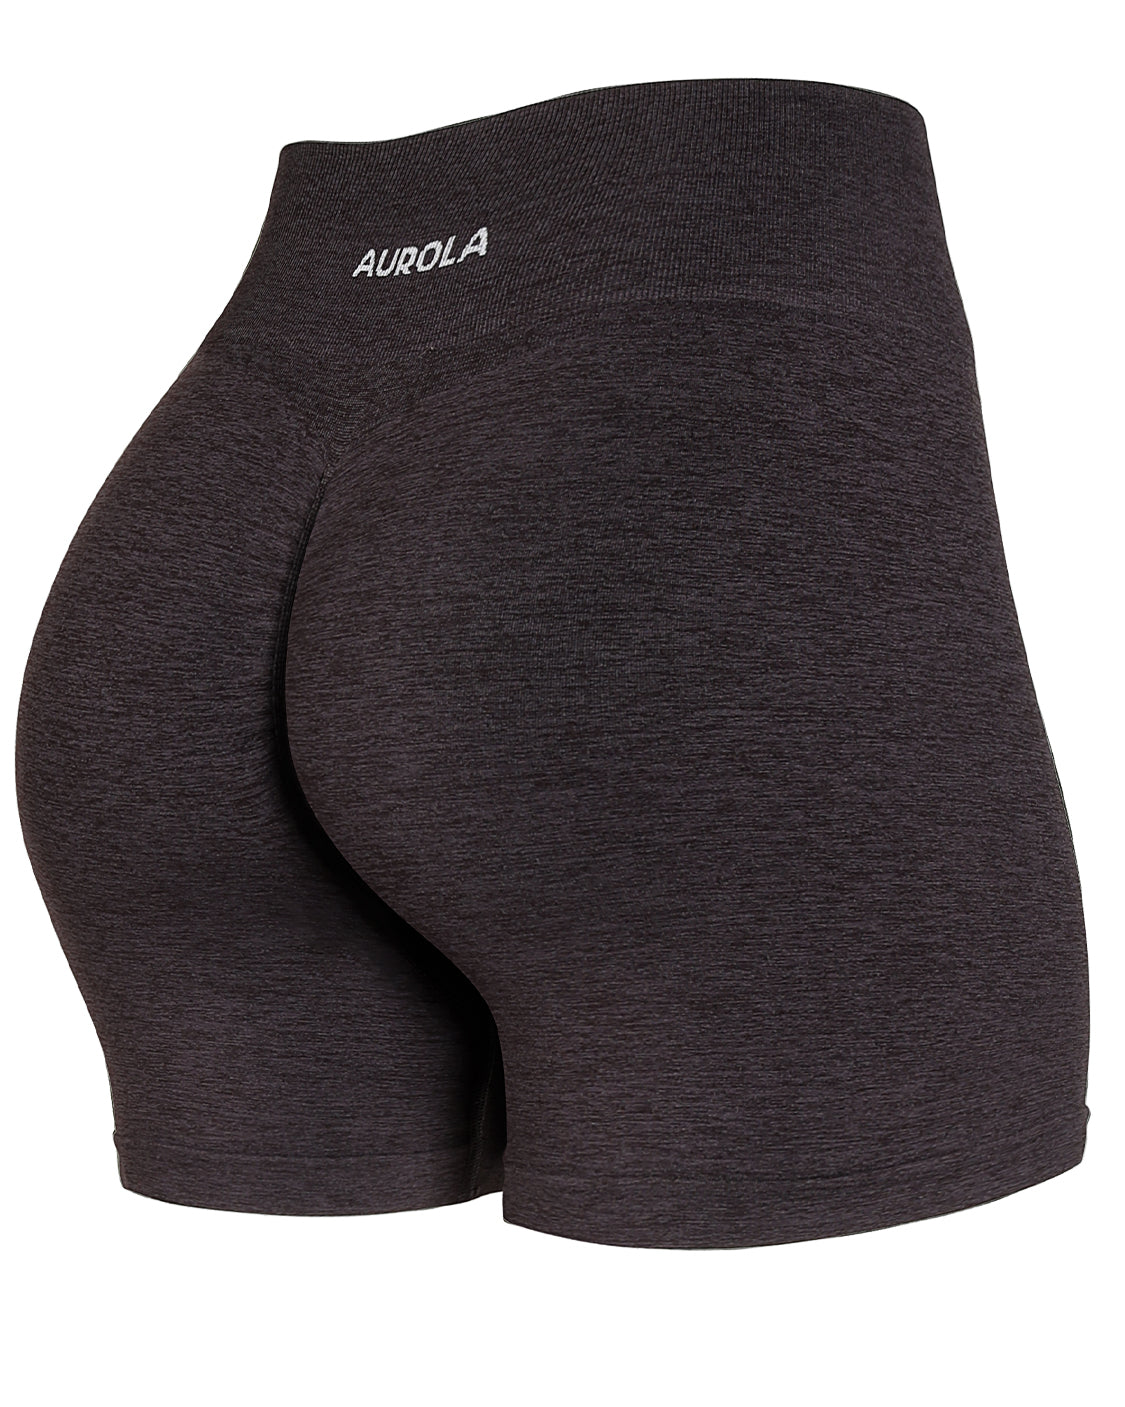 AUROLA Intensify Workout Shorts for Casual Chic